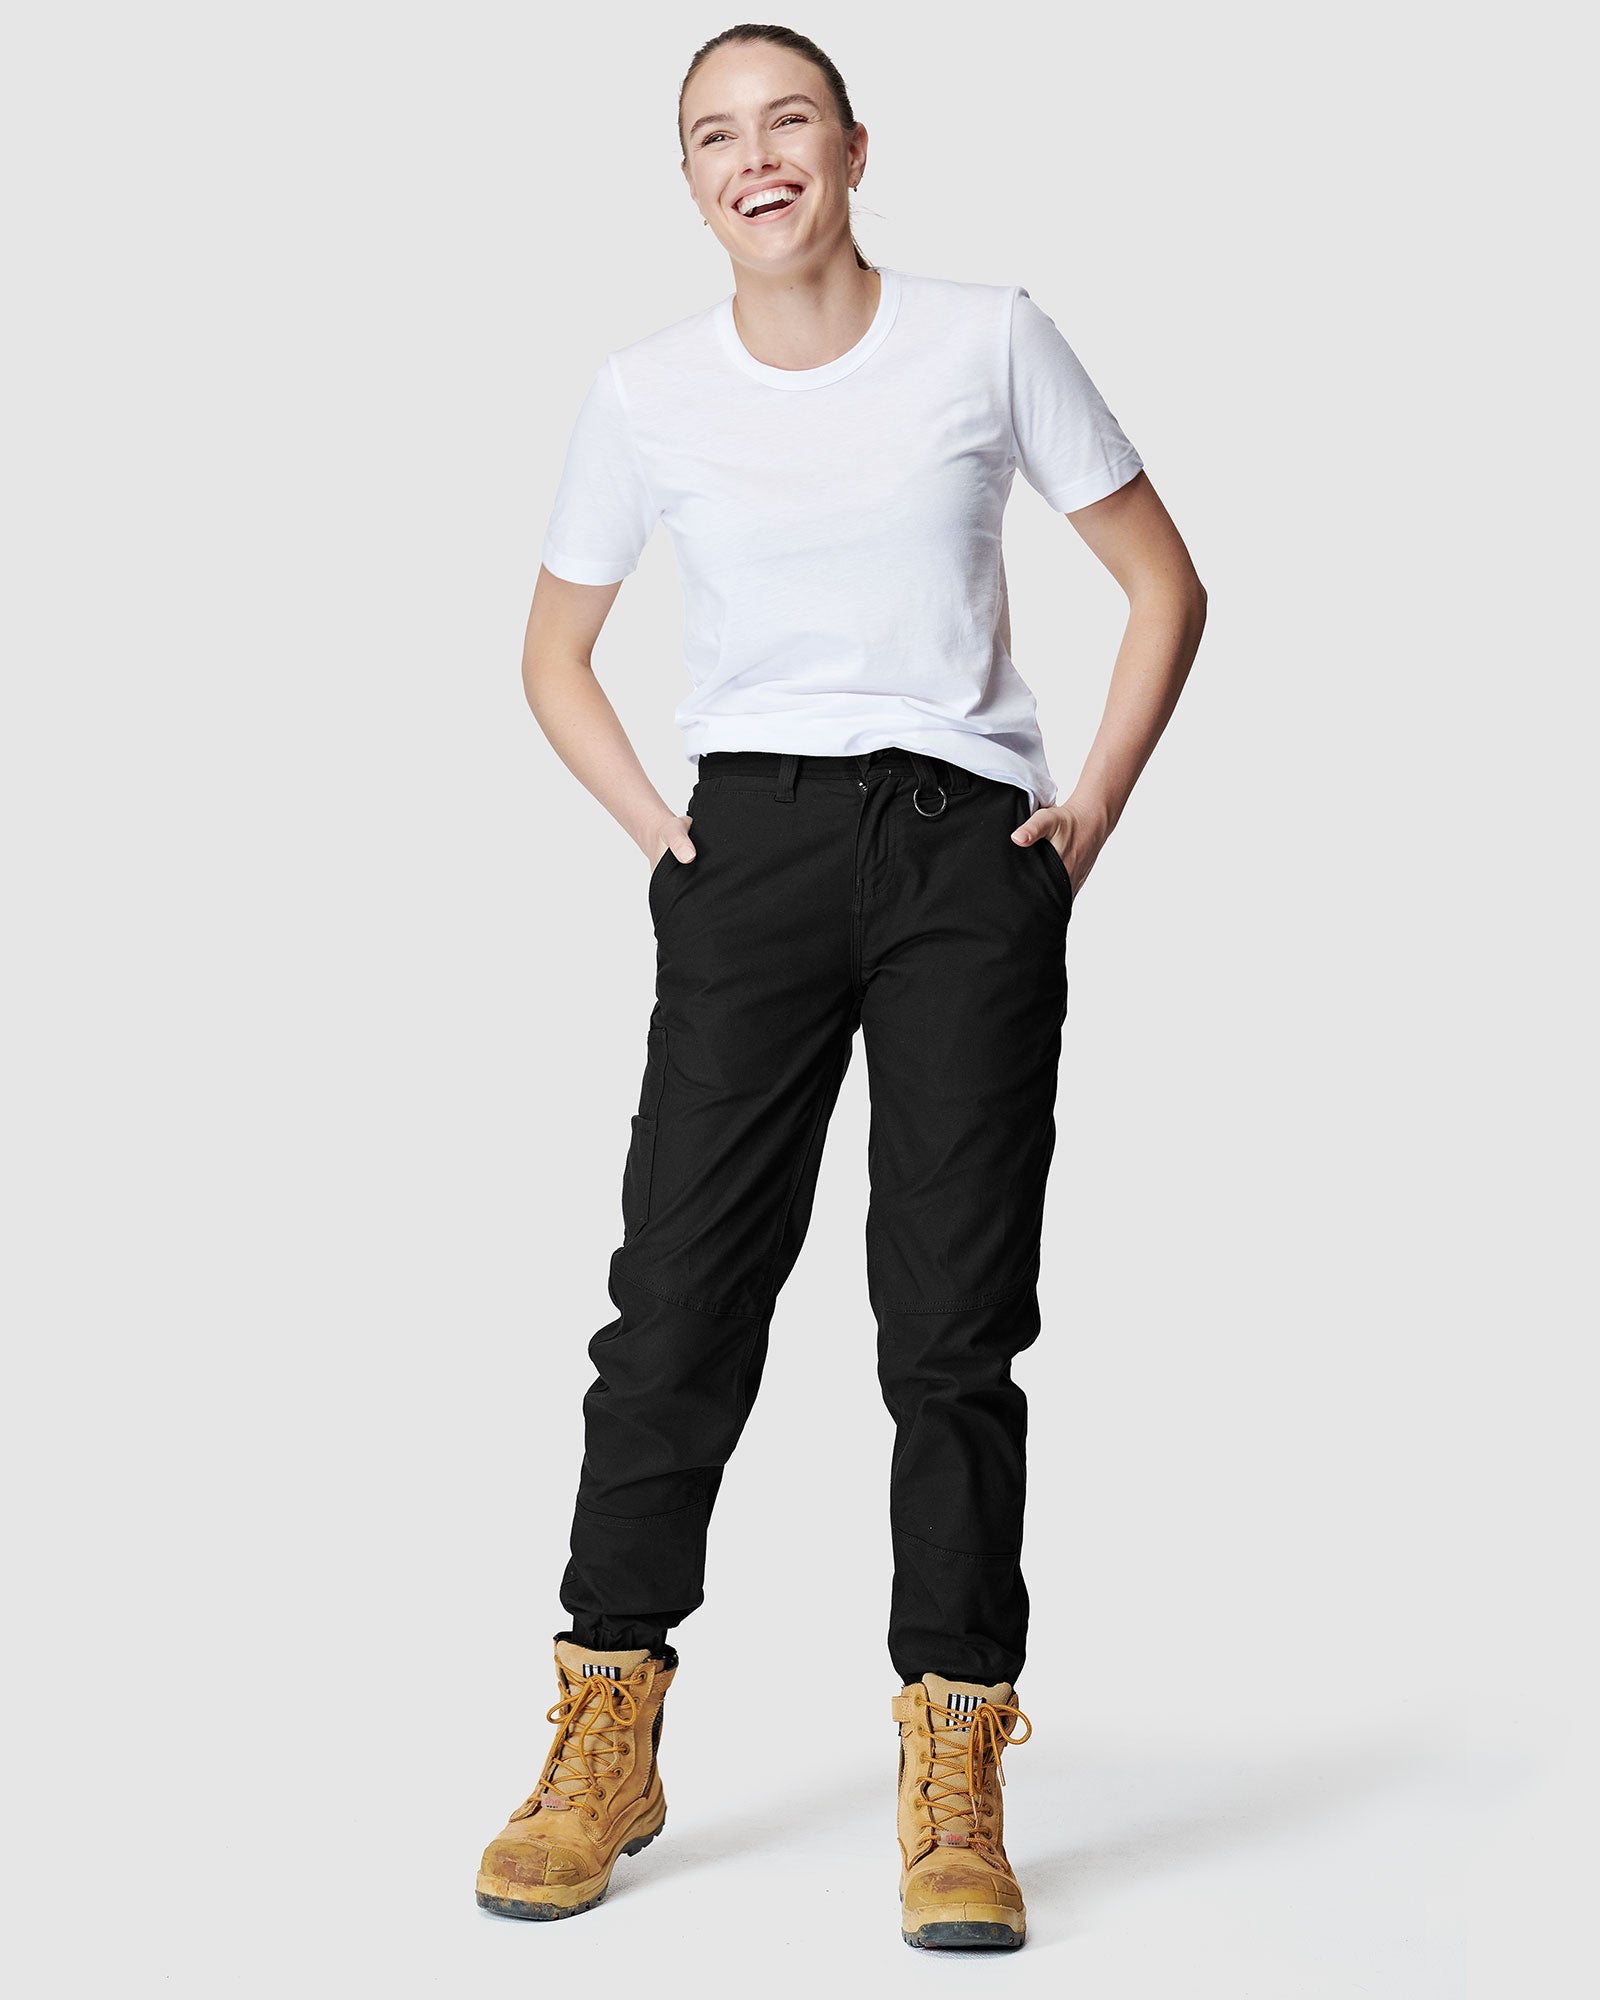 Women's Trousers – Experience